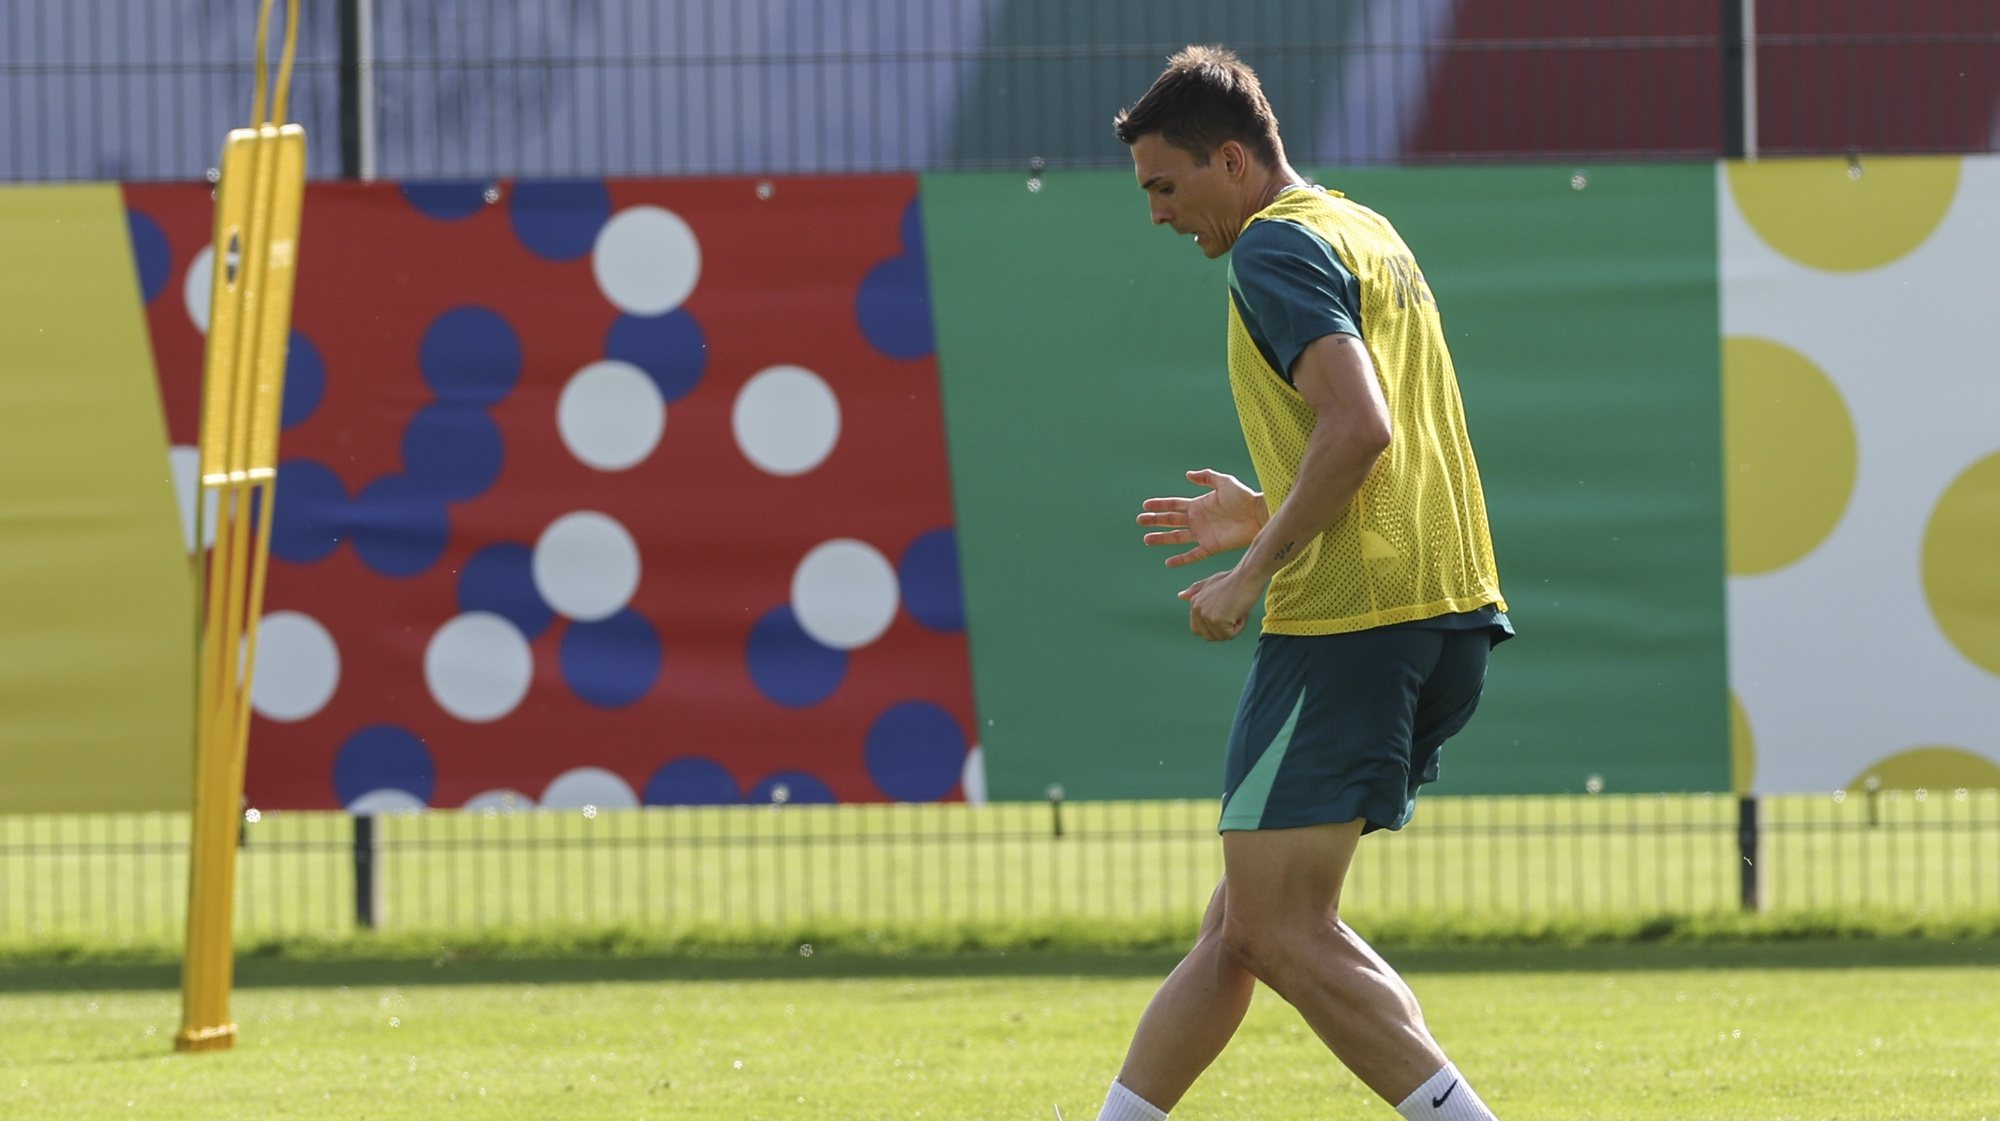 Portugal national soccer team player Joao Palhinha during a training session in Marienfeld, Harsewinkel, Germany, 29 June 2024. The Portuguese national soccer team is based in Marienfeld, Harsewinkel during the UEFA EURO 2024. MIGUEL A. LOPES/LUSA